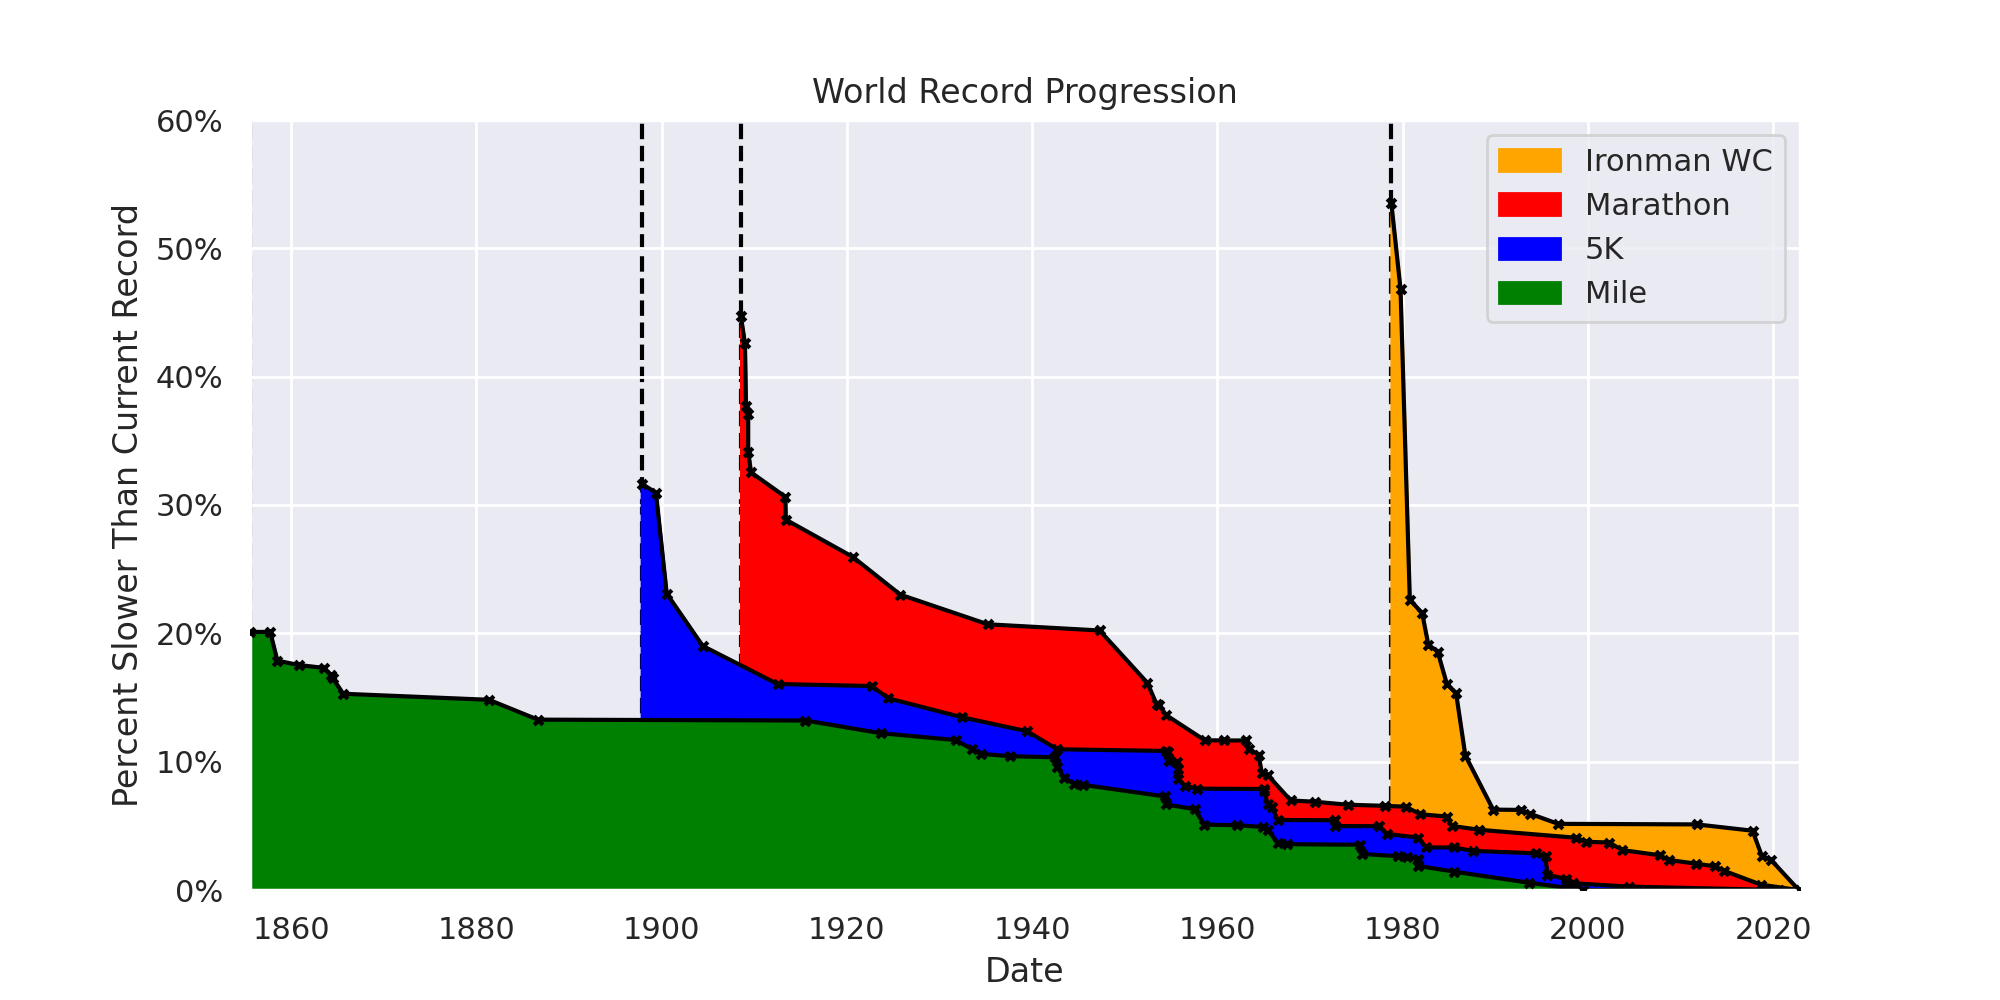 Relative World Record Progression. Dashed lines represent the first recorded record